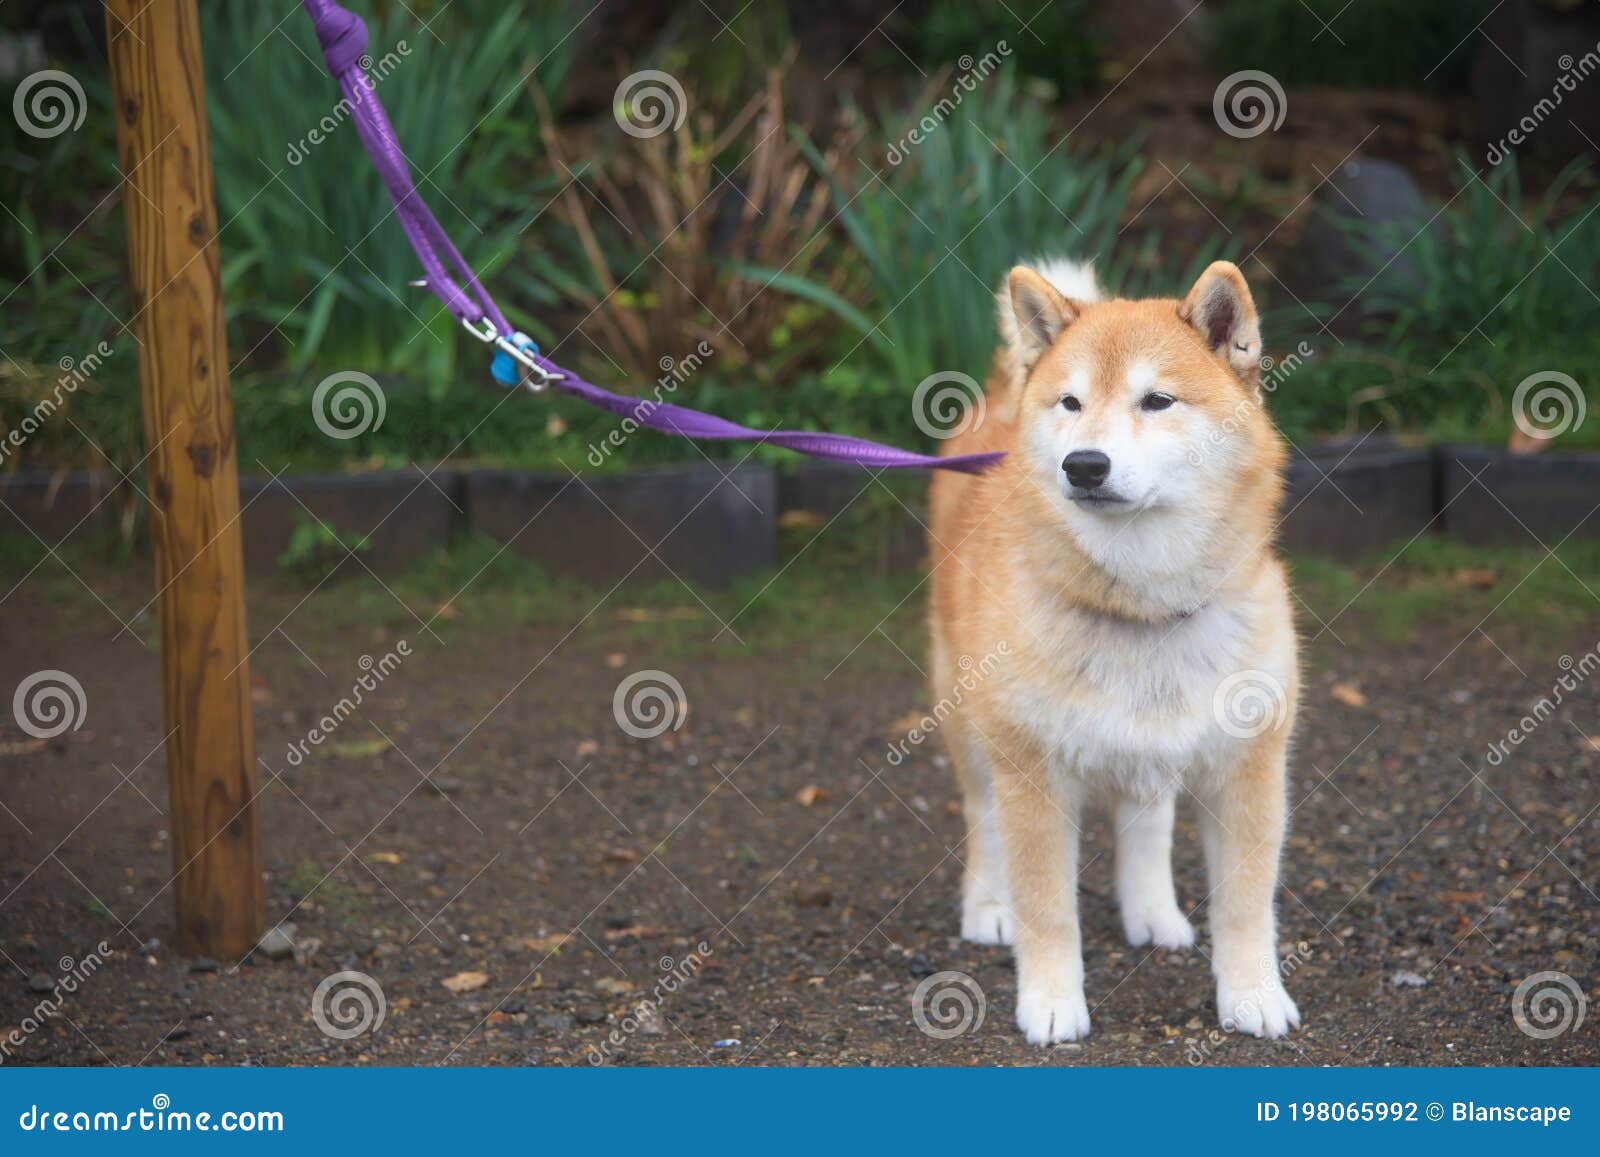 shiba inu tether by leash on wooden post in park